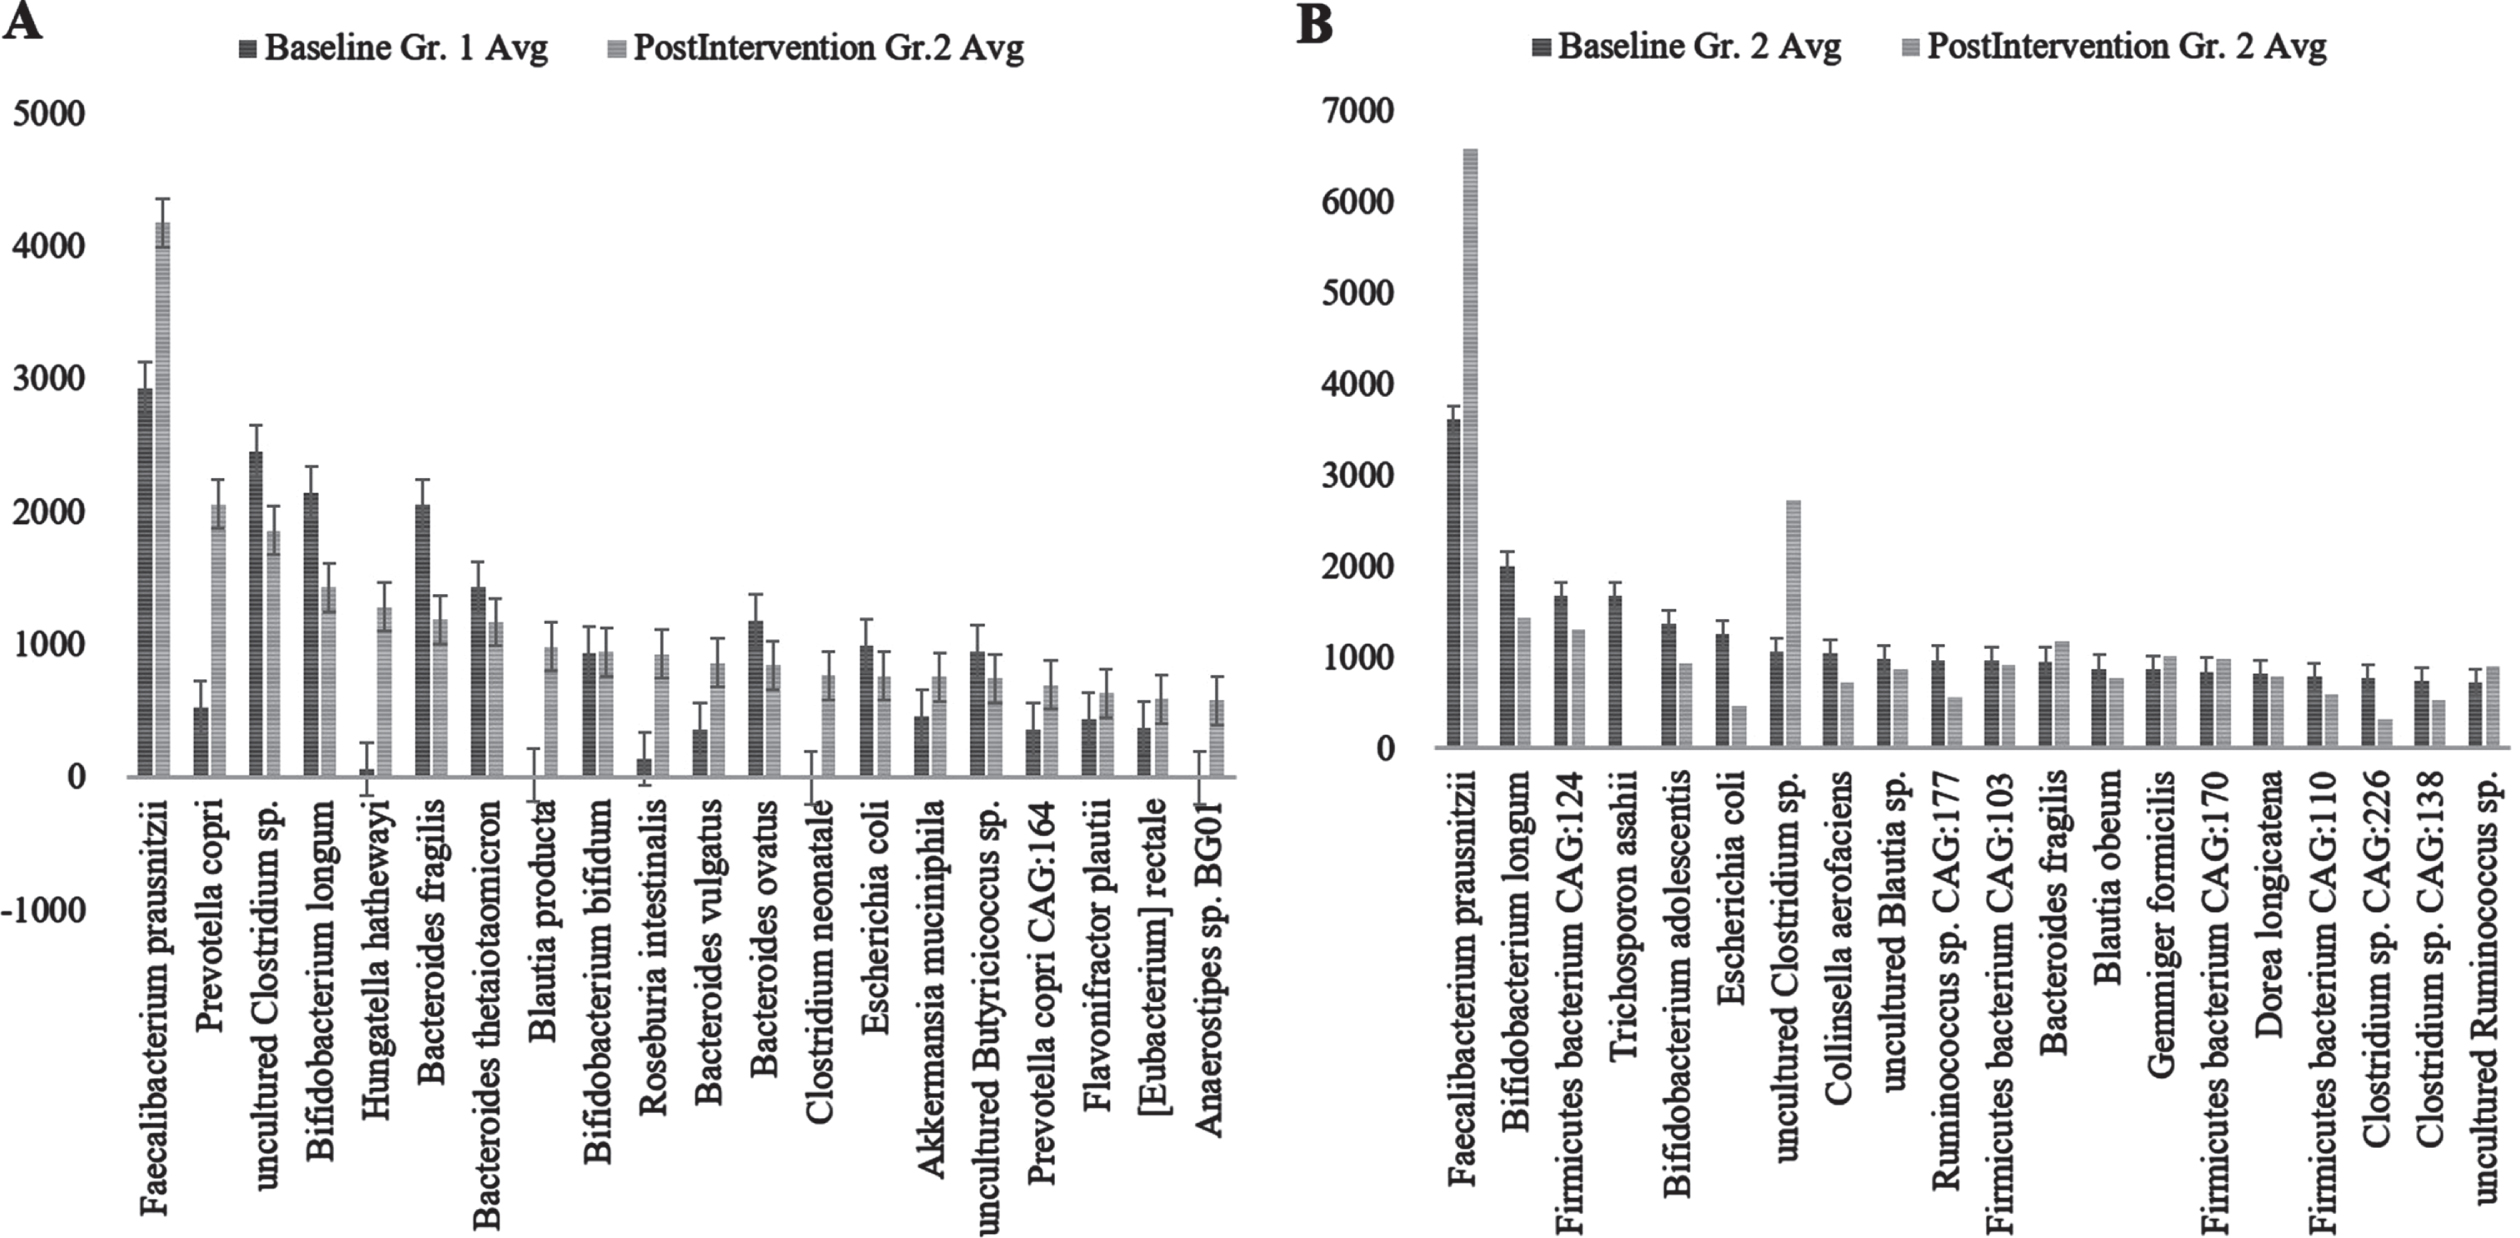 Species abundance of major species analyzed; A) Group (Gr.) 1 at baseline versus postintervention and B) Group (Gr.) 2 at baseline versus postintervention. Fecalibacterium prausnitzii, Bifidobacterium longum, and Firmicutes bacterium CAG:124 represented the most abundant species.